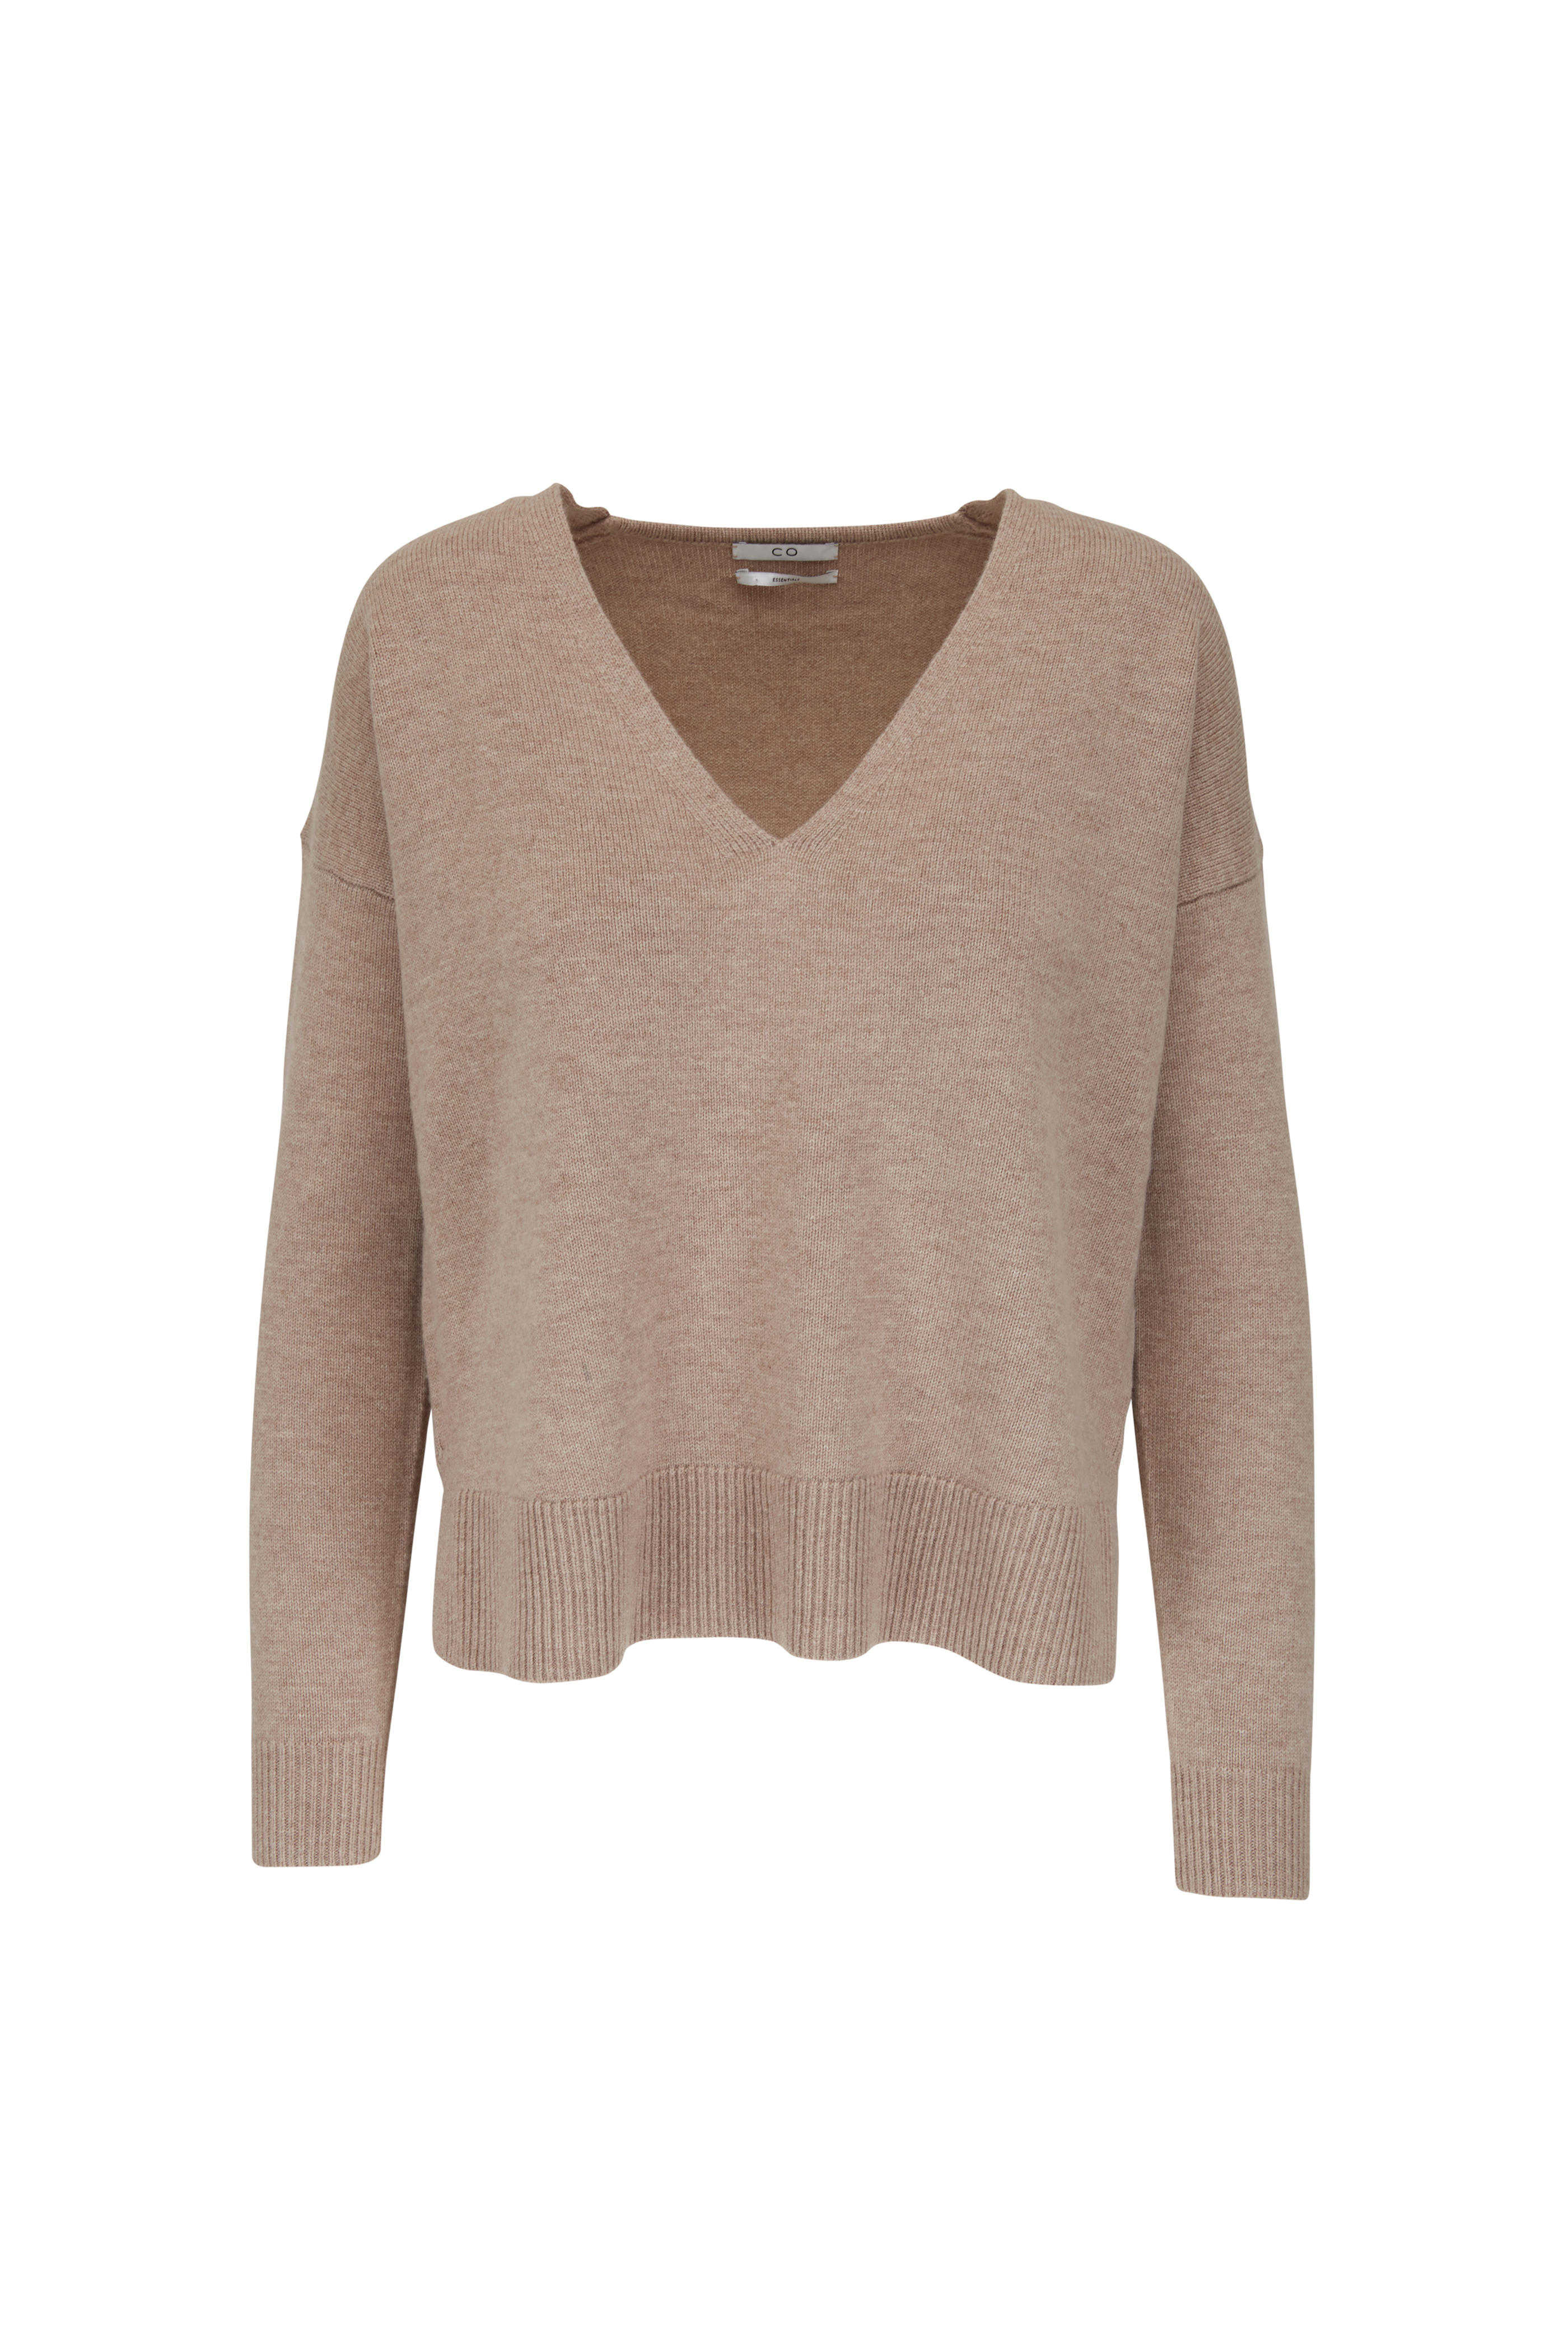 Taupe Cashmere & Wool V-Neck Sweater